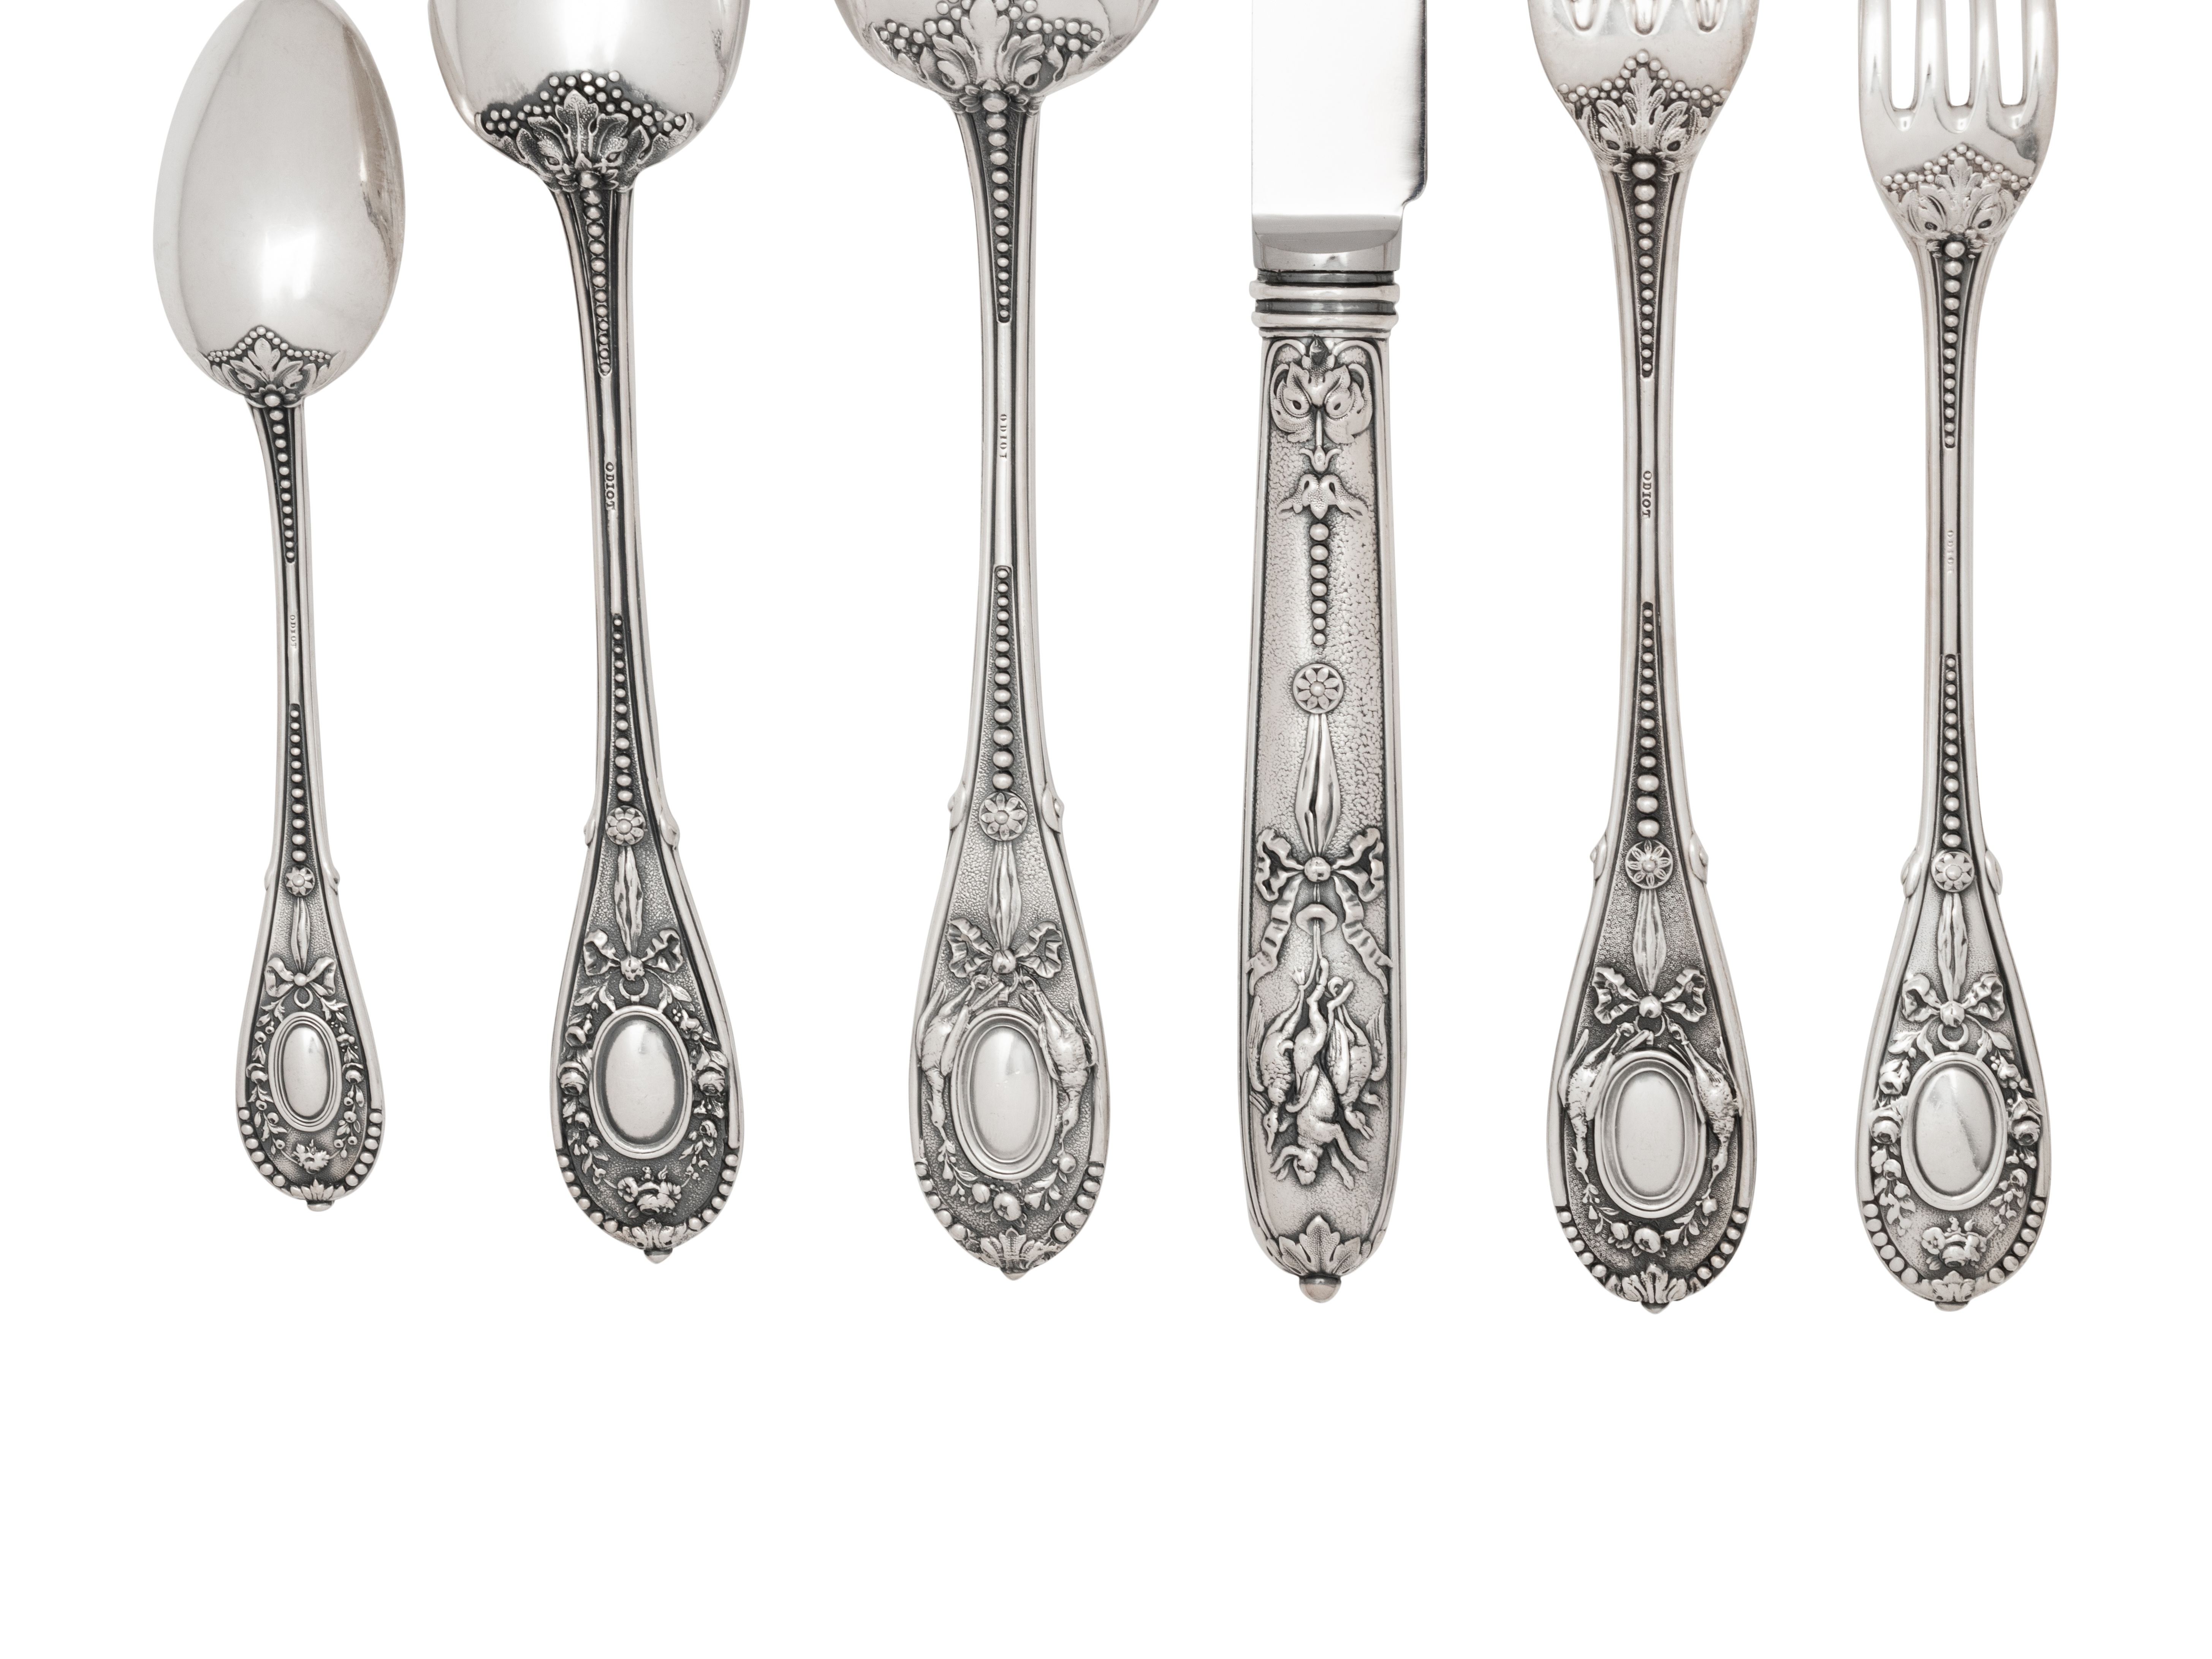 A French Silver Flatware Service - Image 6 of 9